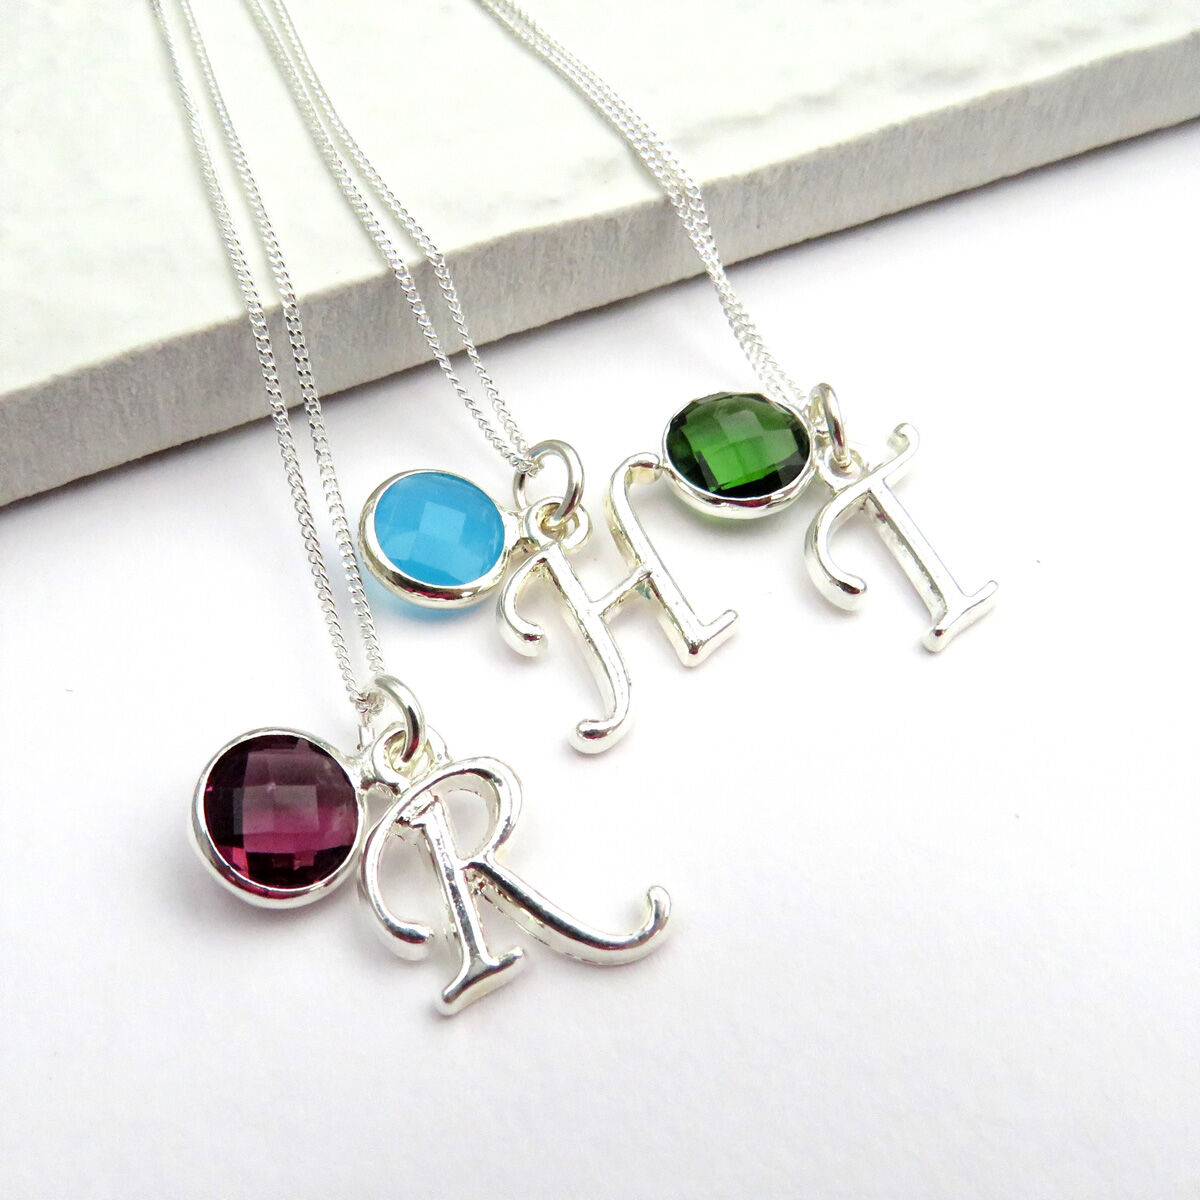 Birthstone & Initial Letter Charm Necklace | Posh Totty Designs